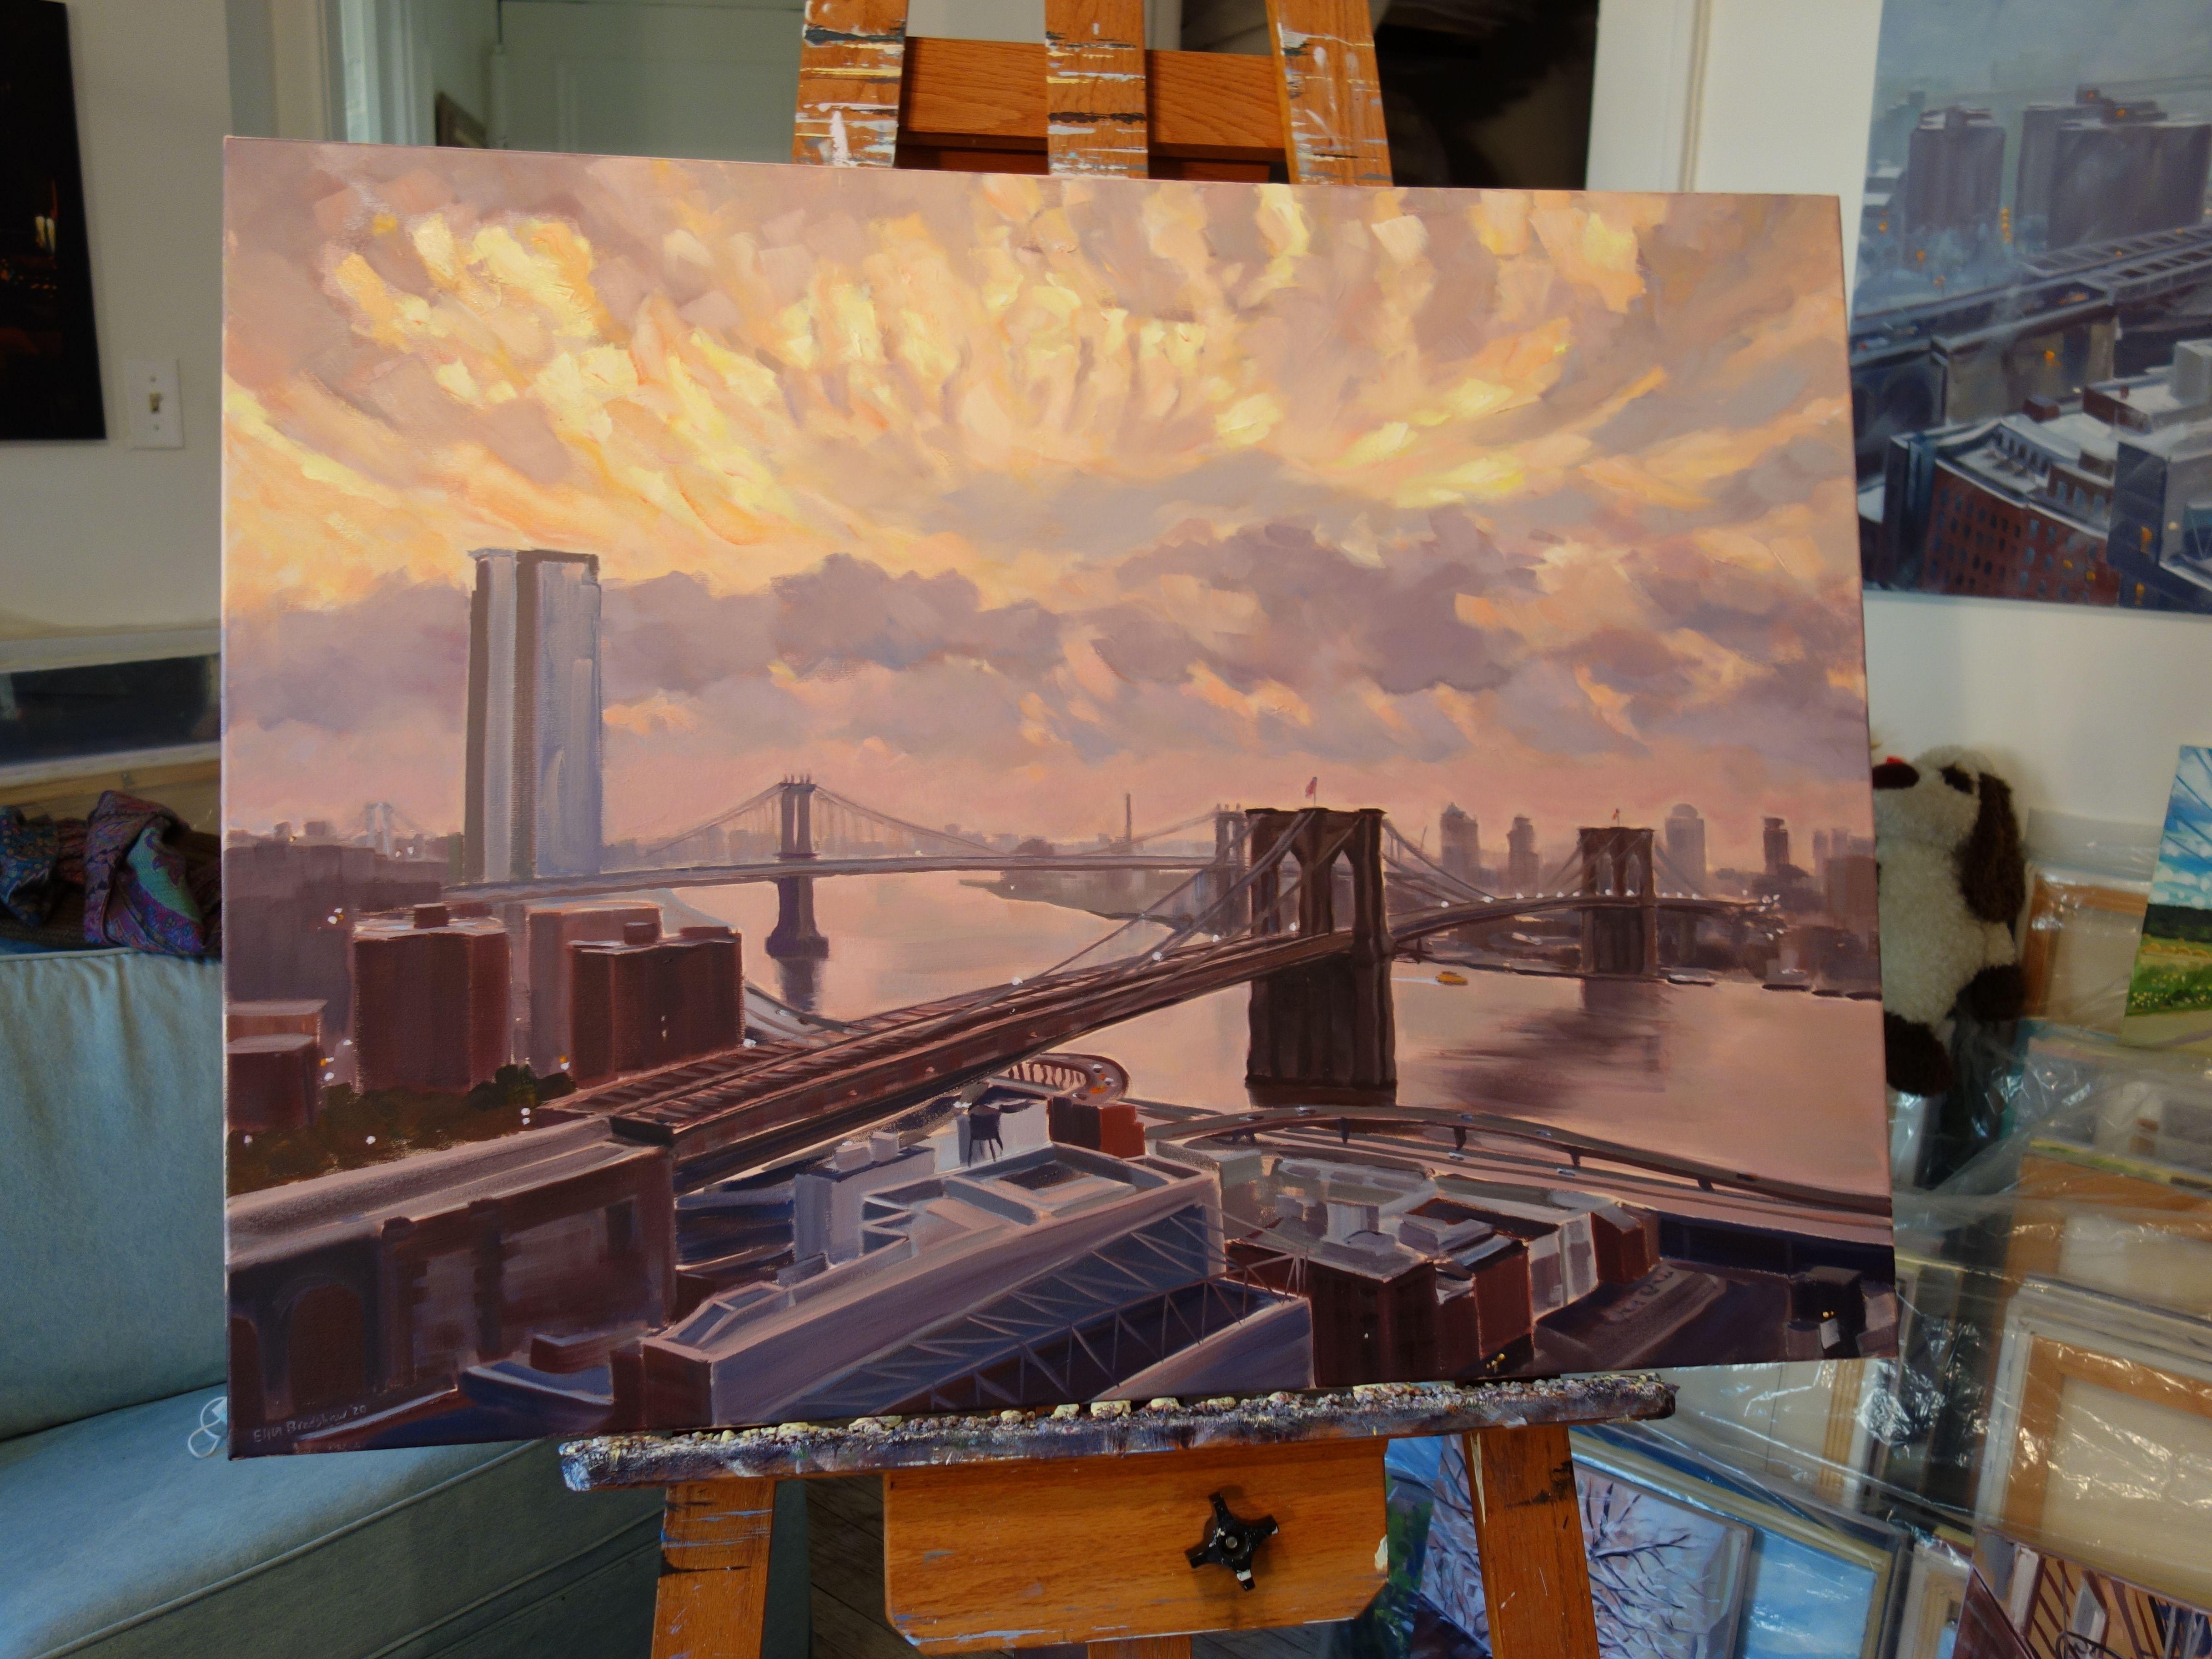 A stunning sunrise view from the artist's balcony on the 25th floor of her apartment inspired this colorful vision! As the sun breaks through the fog, swirling pastel pinks and mauve and orange and yellow grey hues sing above the Brooklyn and